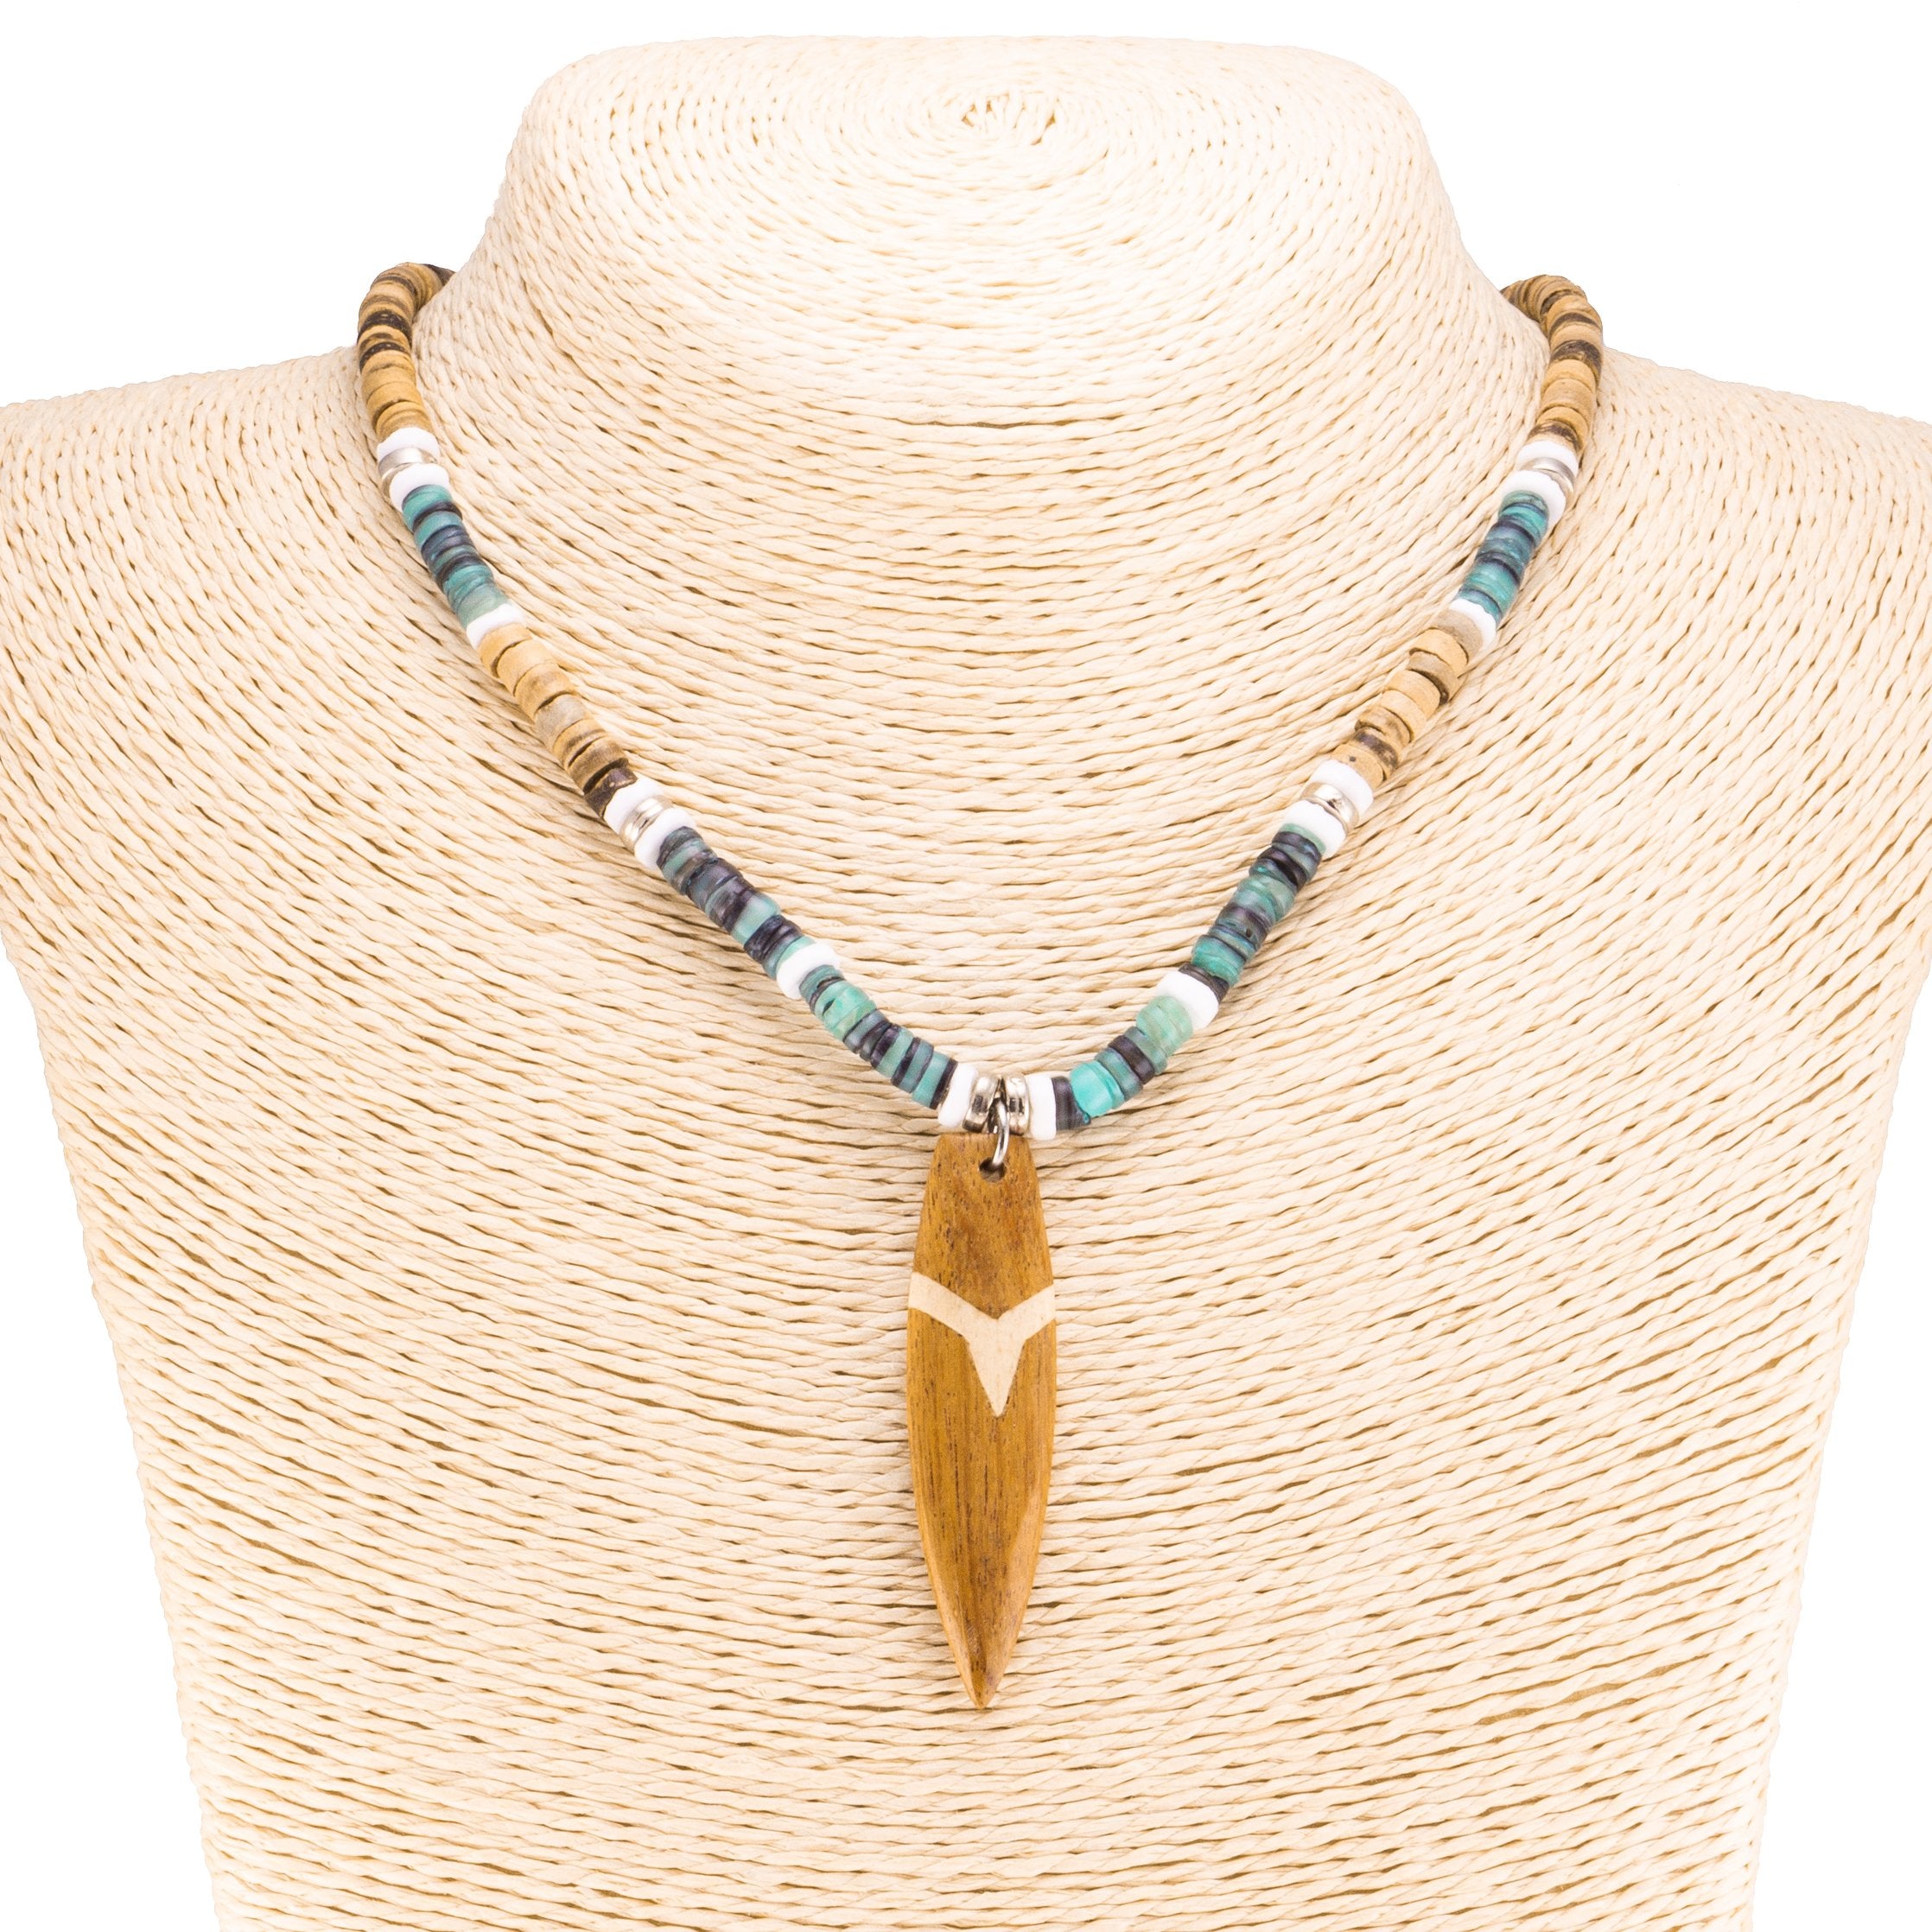 Wood Surfboard Pendant on Tiger Coconut and Green Shell Beads Necklace